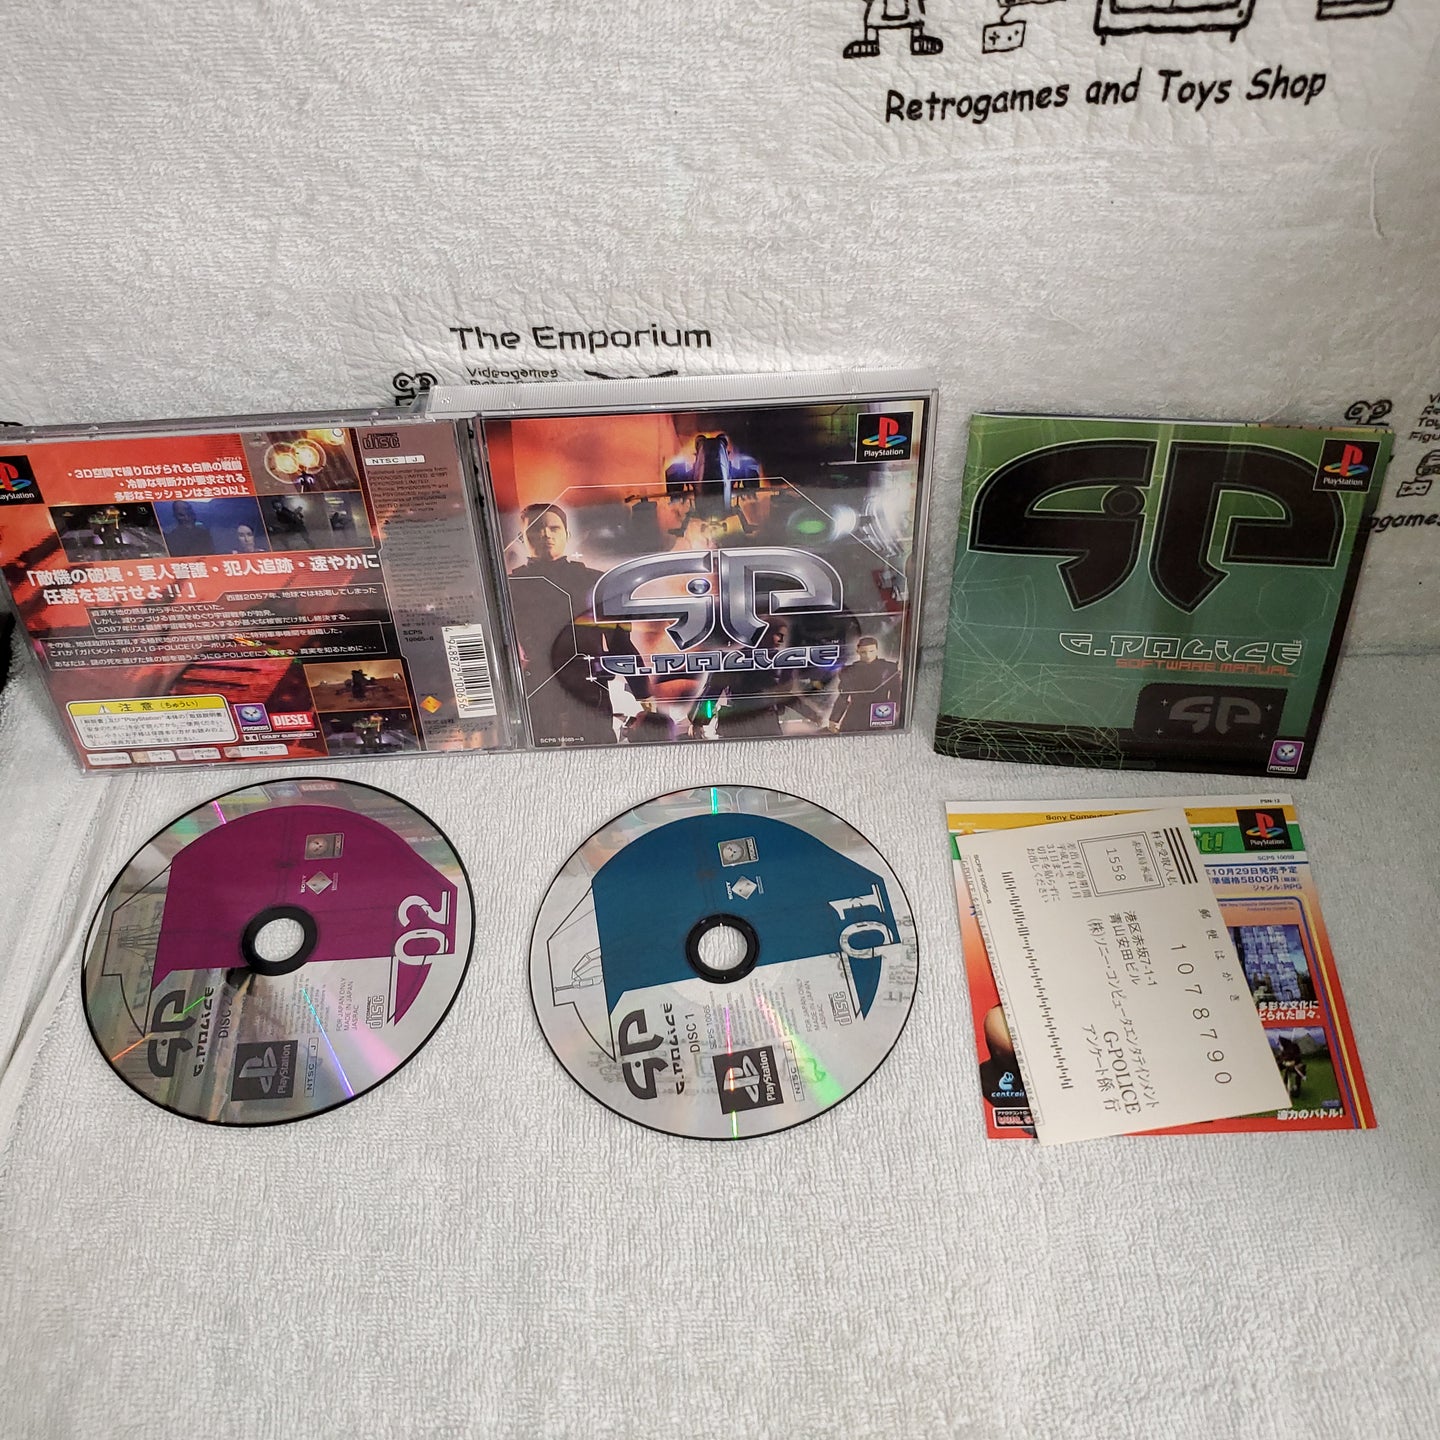 G-police - sony playstation ps1 japan